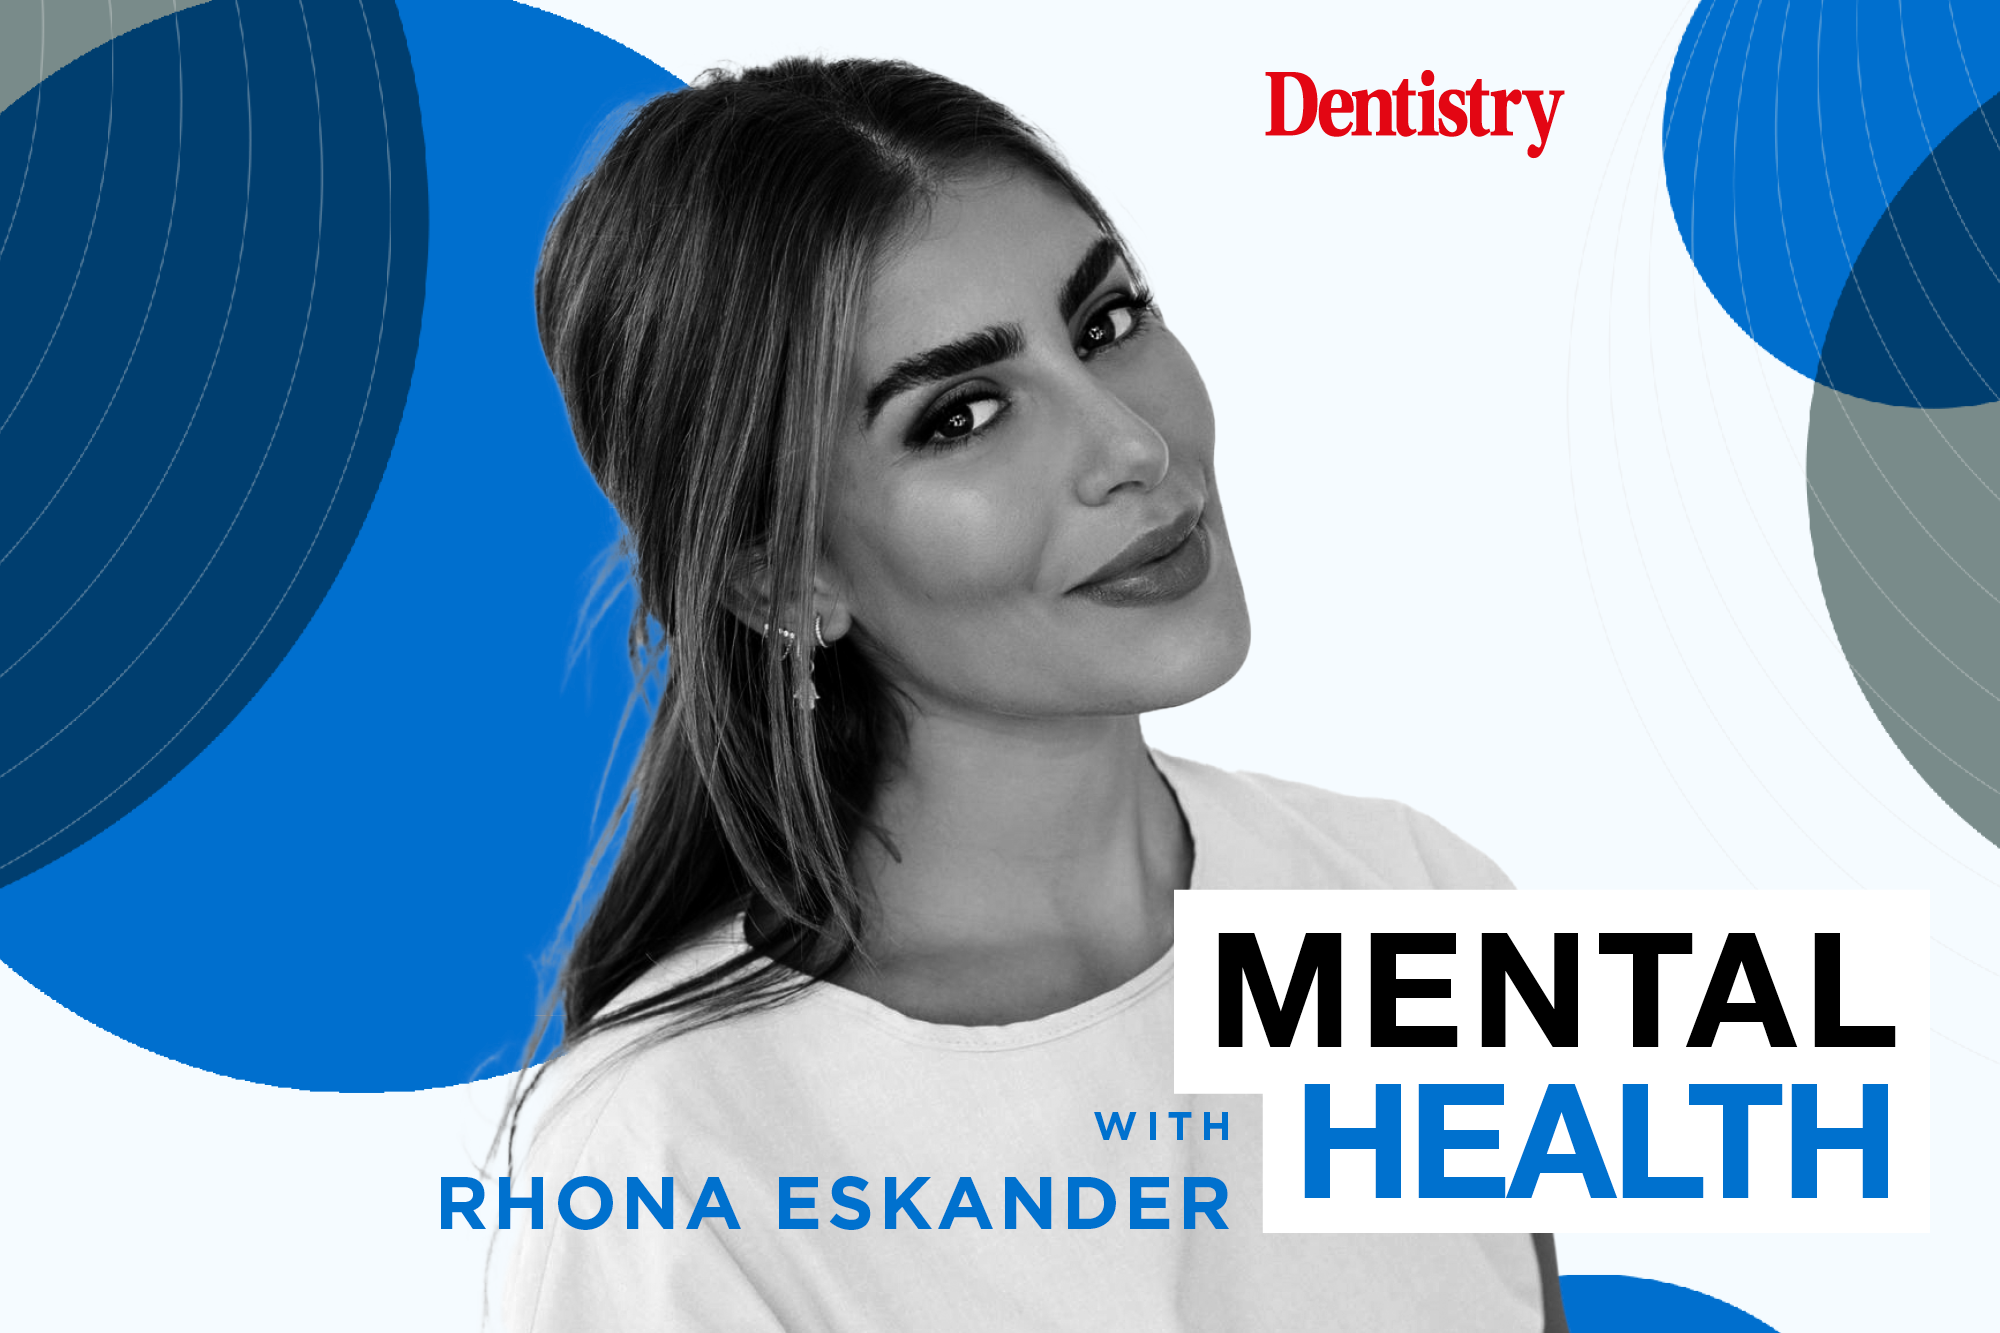 In the first of her brand new column, Rhona Eskander sheds light on the urgent need to address mental health in the dental profession.